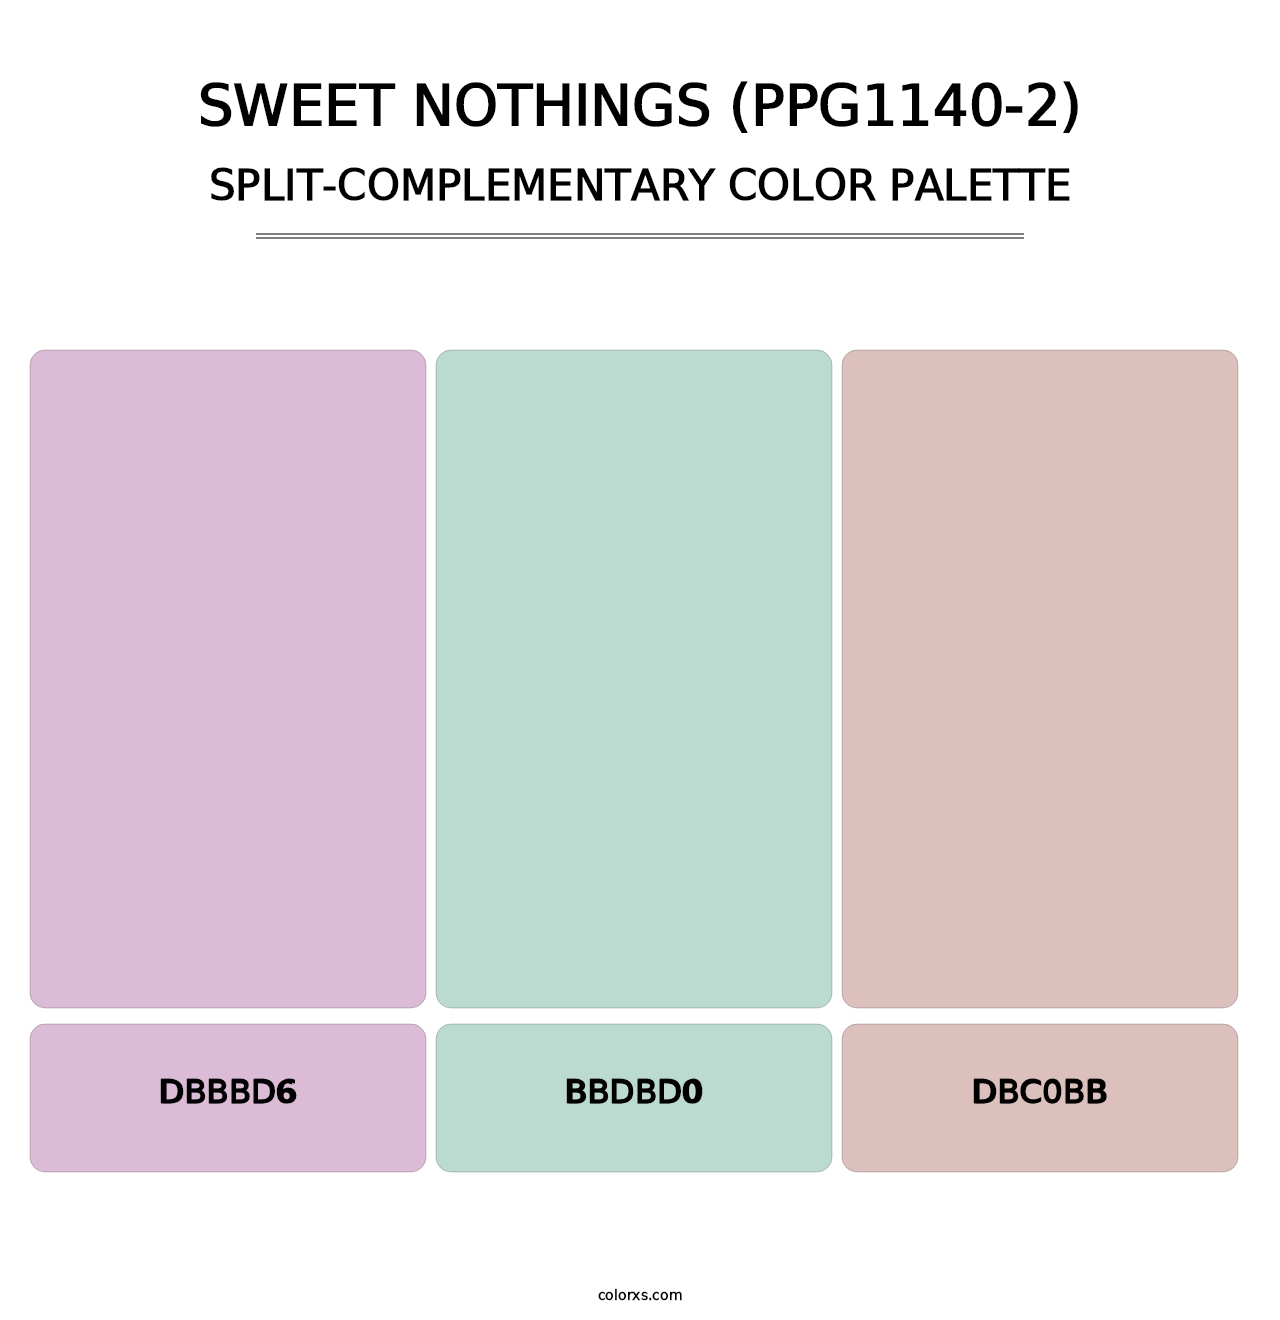 Sweet Nothings (PPG1140-2) - Split-Complementary Color Palette